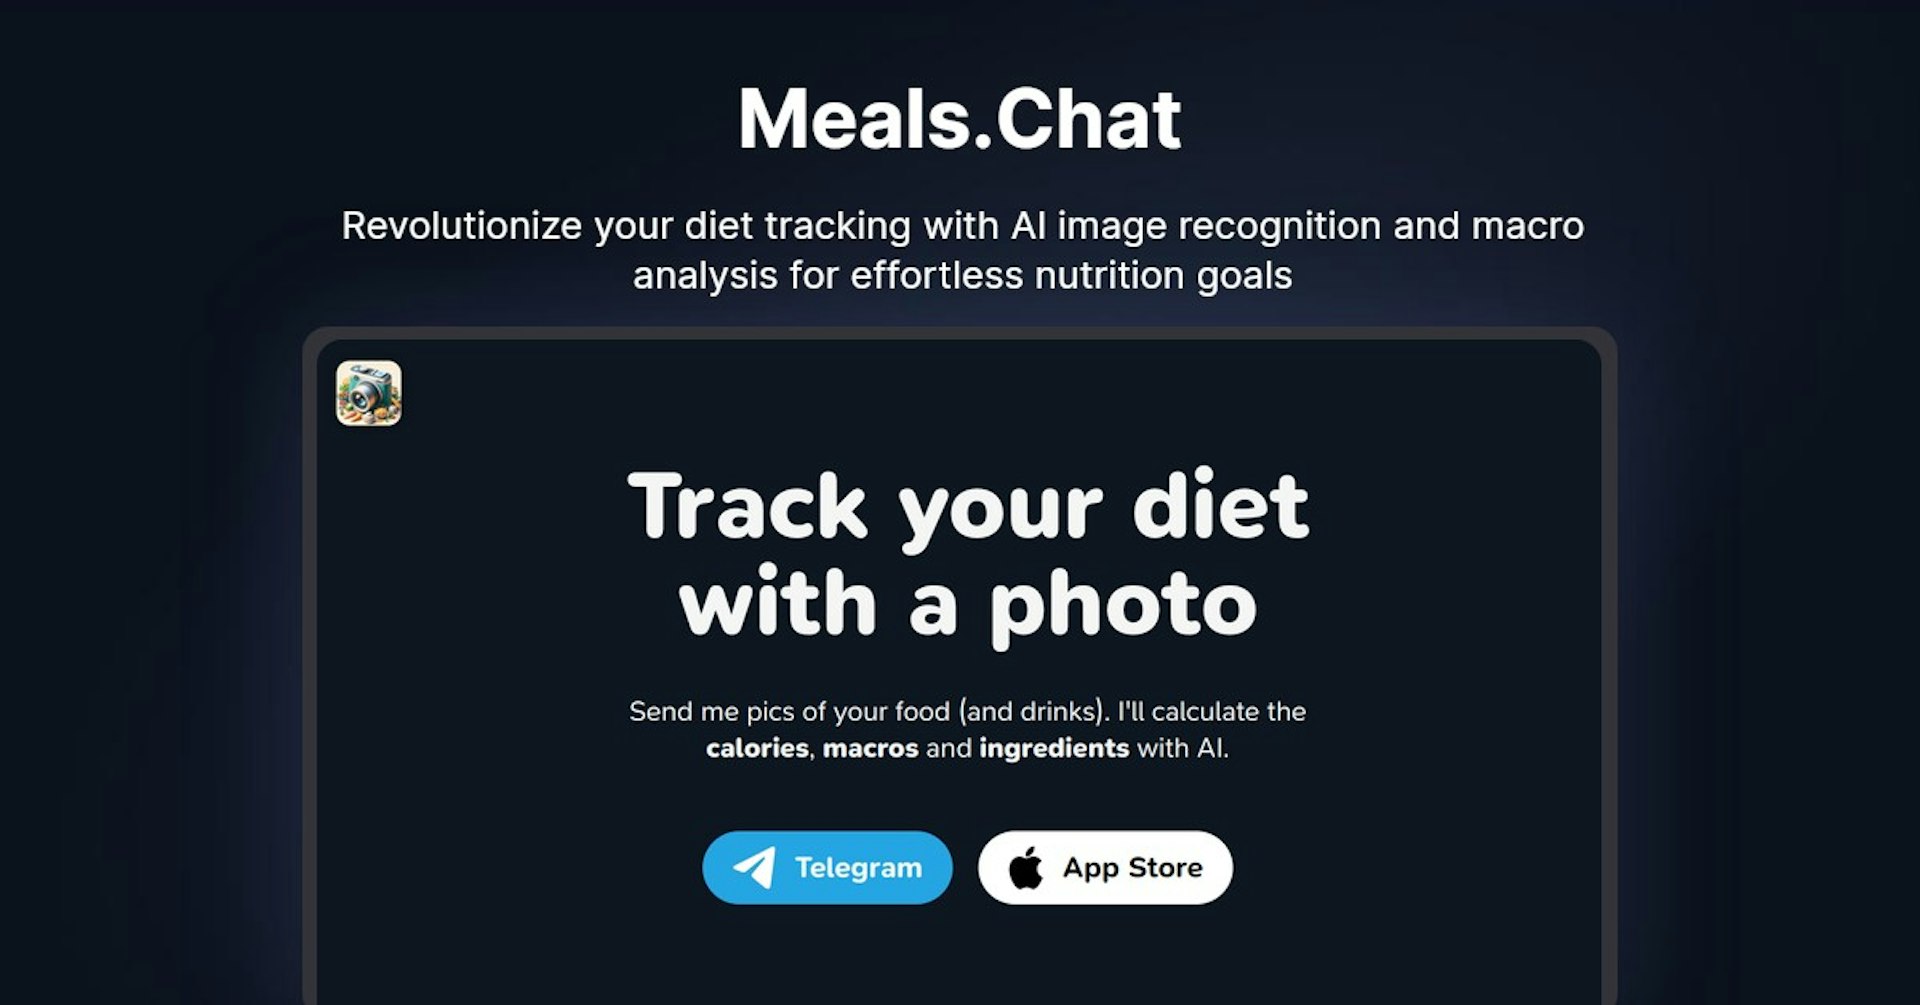 Meals.Chat